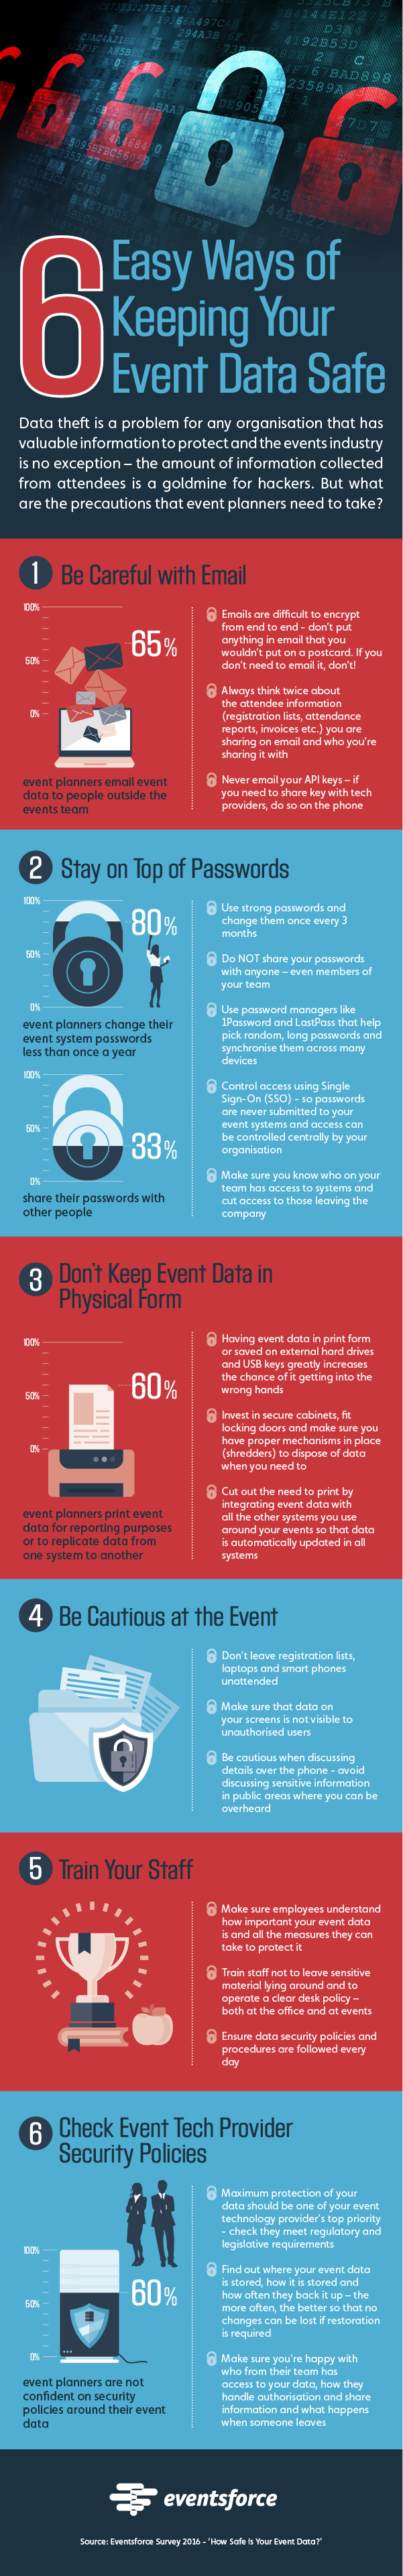 infographic_how-to-keep-your-event-data-safe